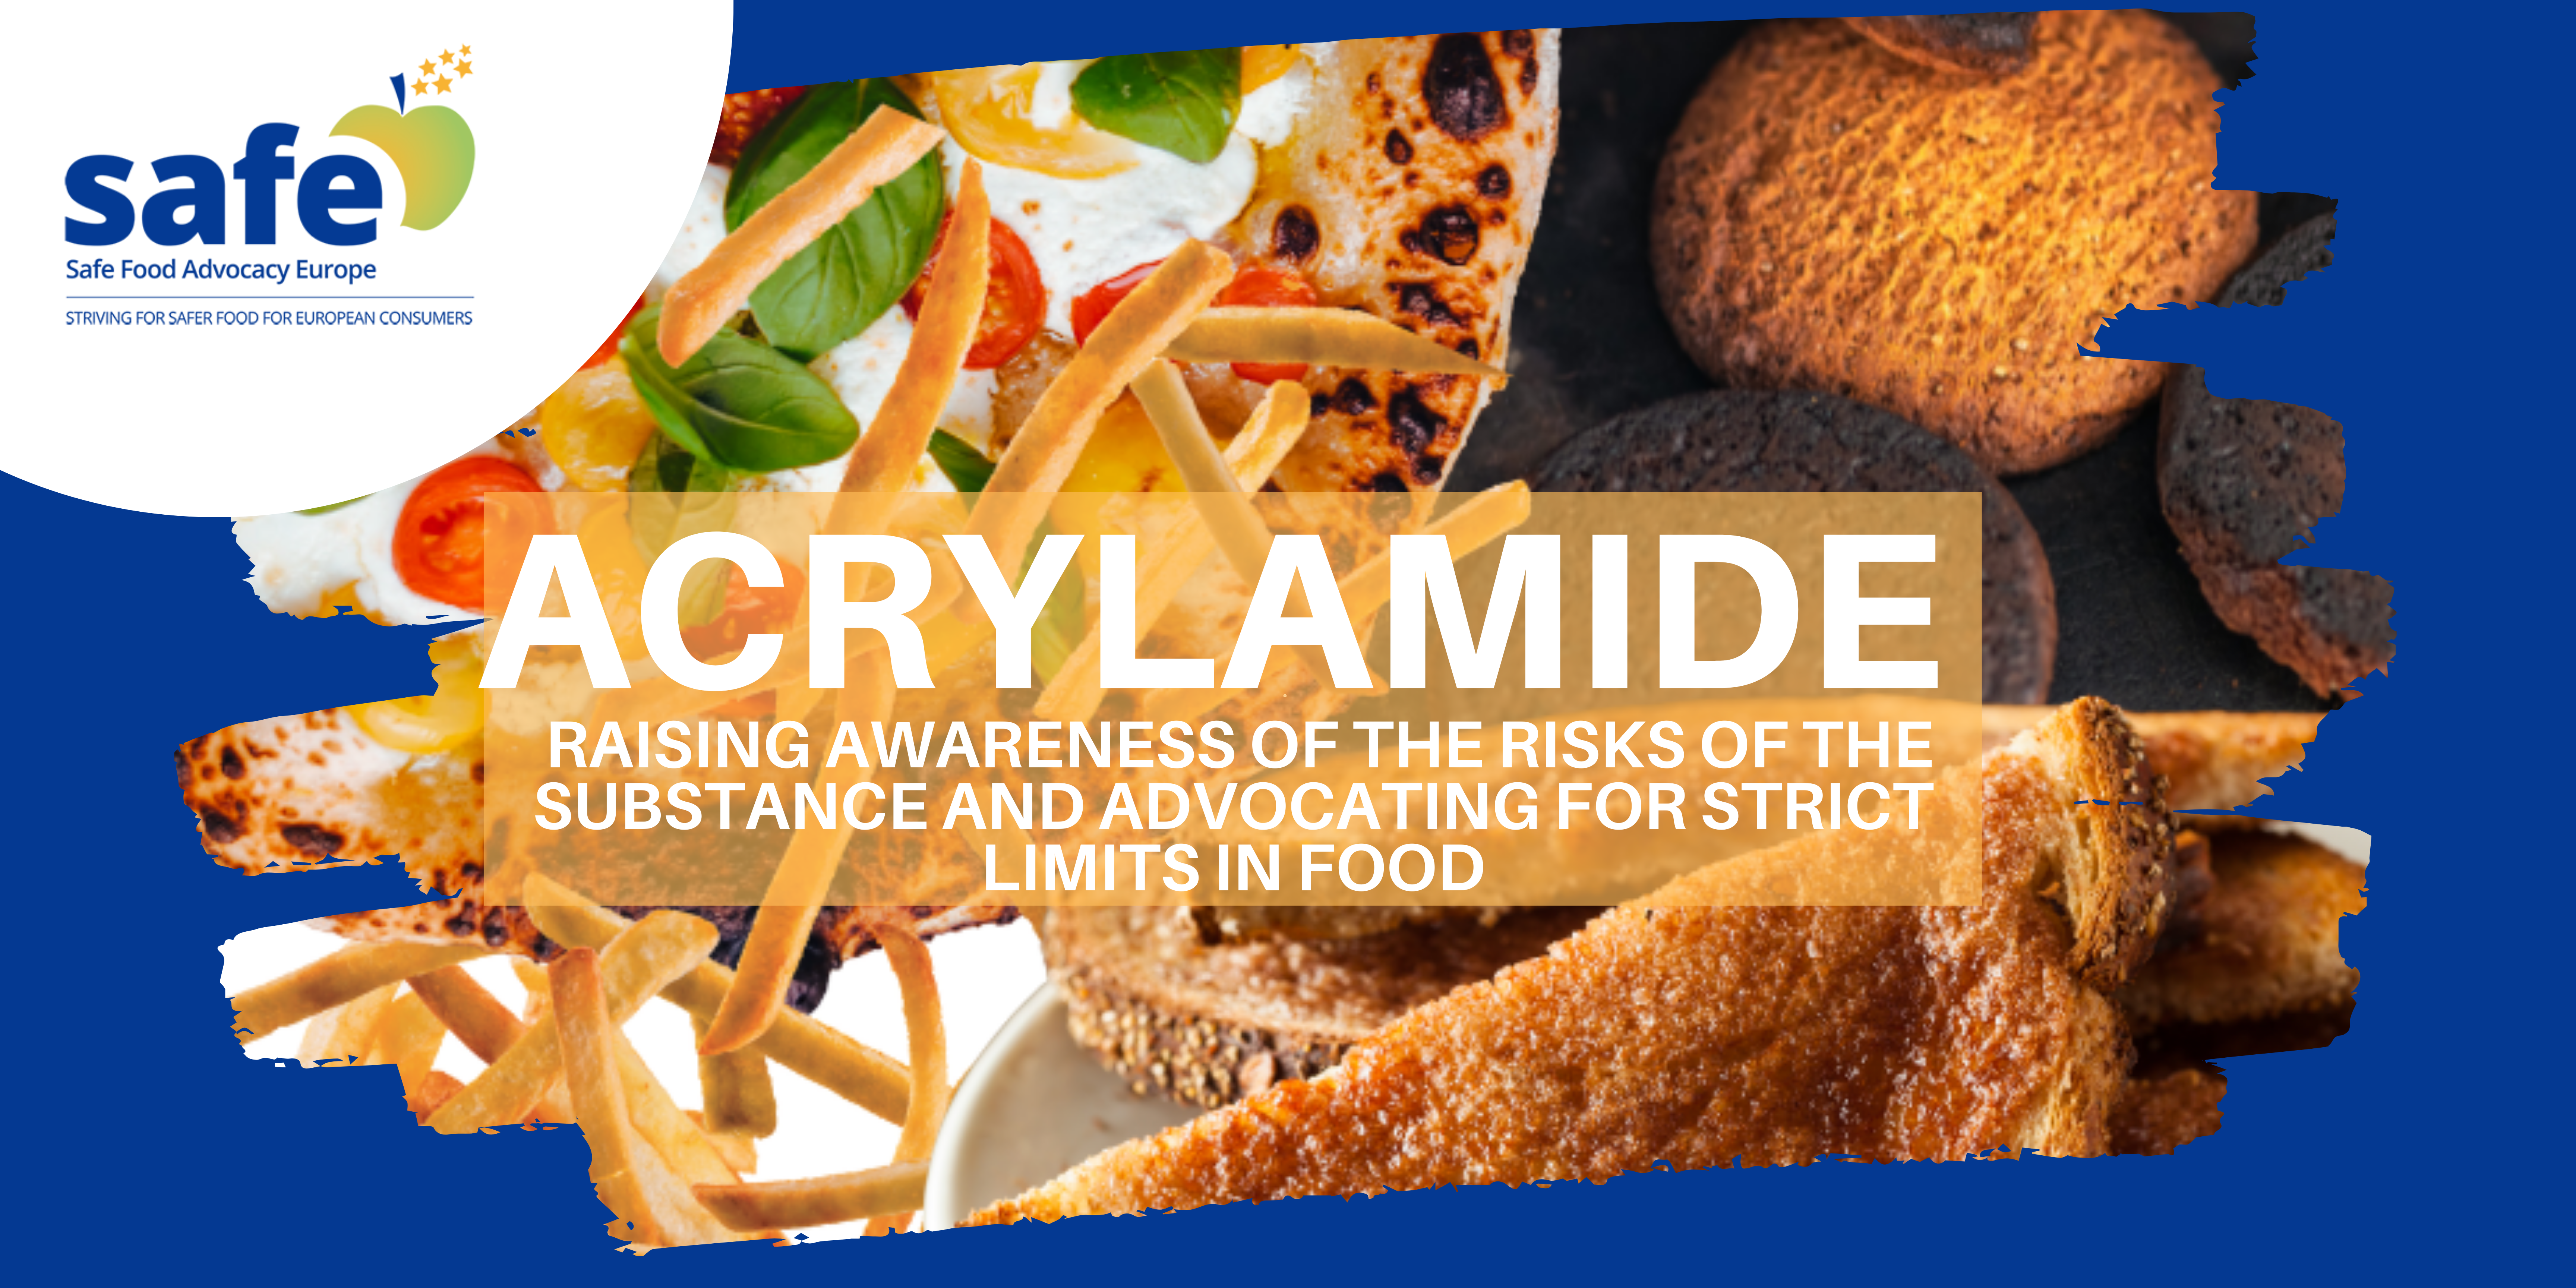 SAFE launches campaign on acrylamide, calls for strict limits in food